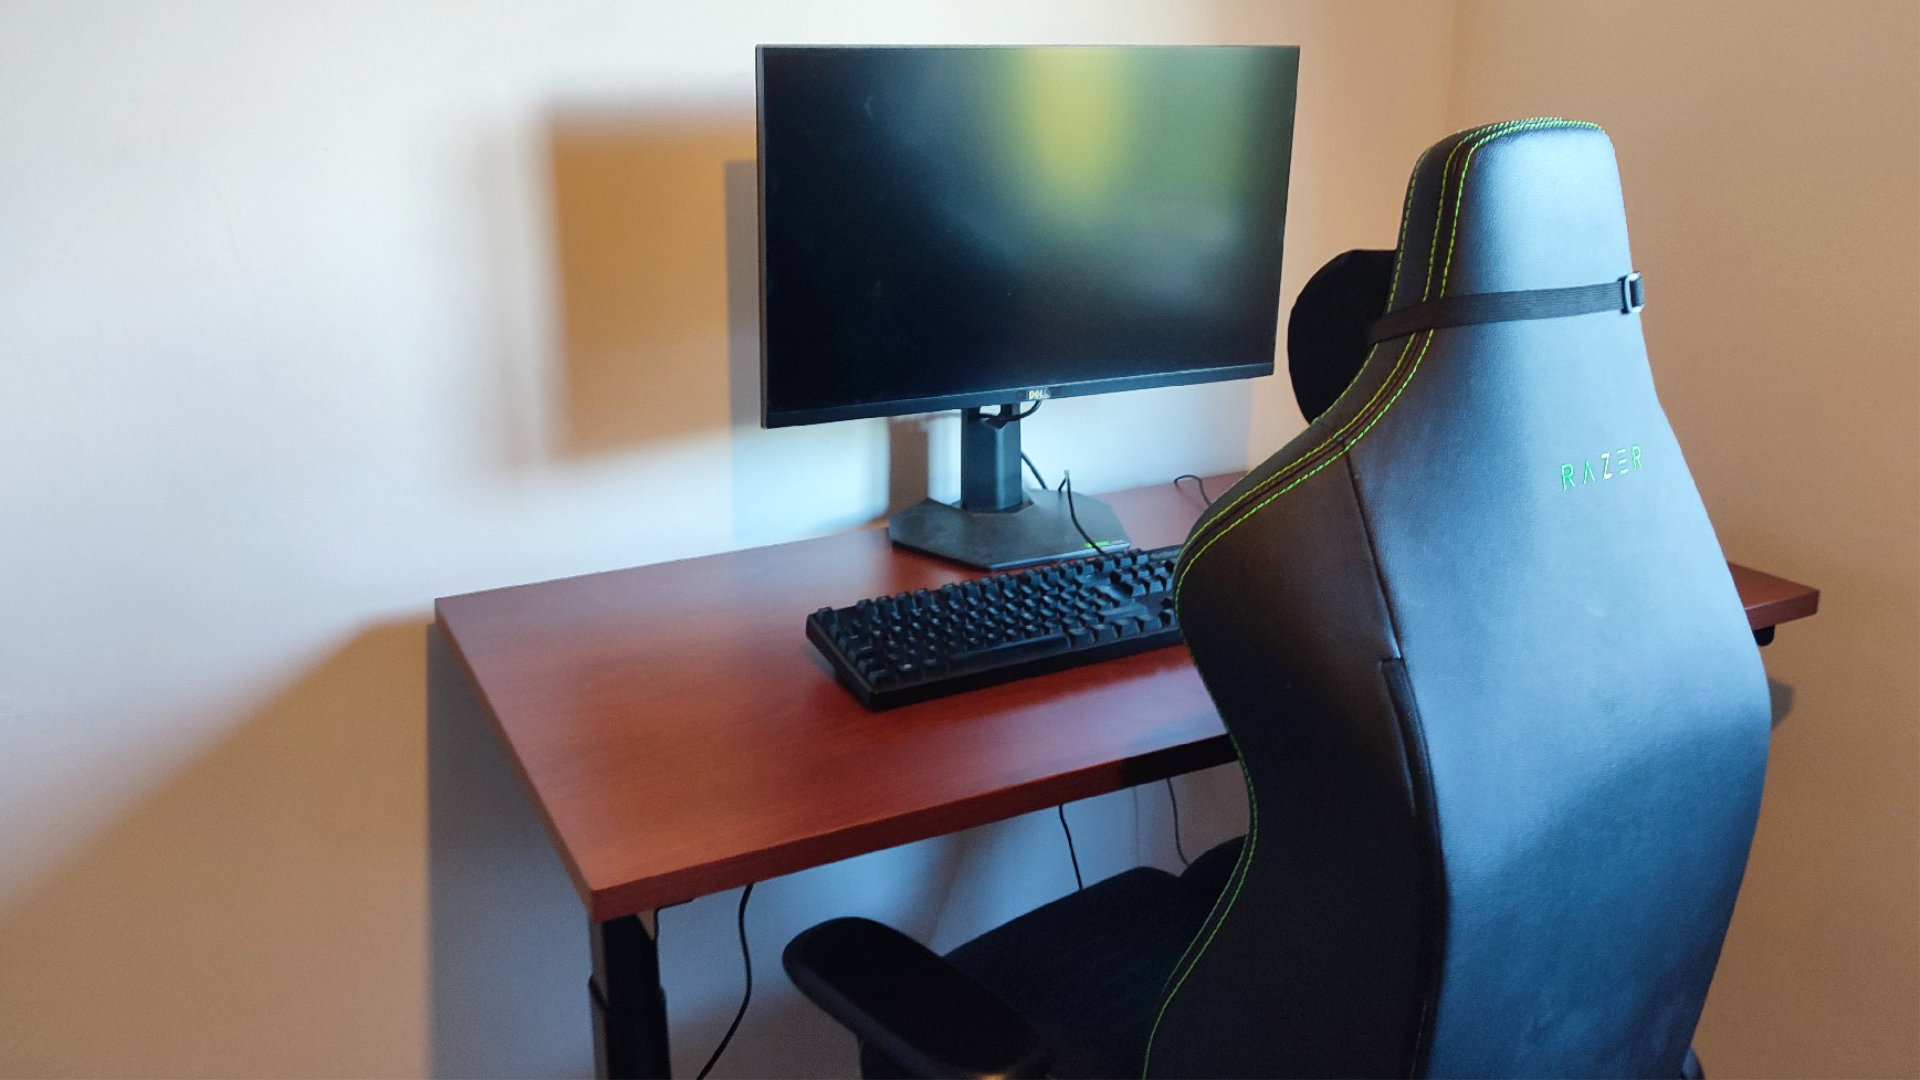 FlexiSpot E8 review – a gaming and standing desk for smaller spaces